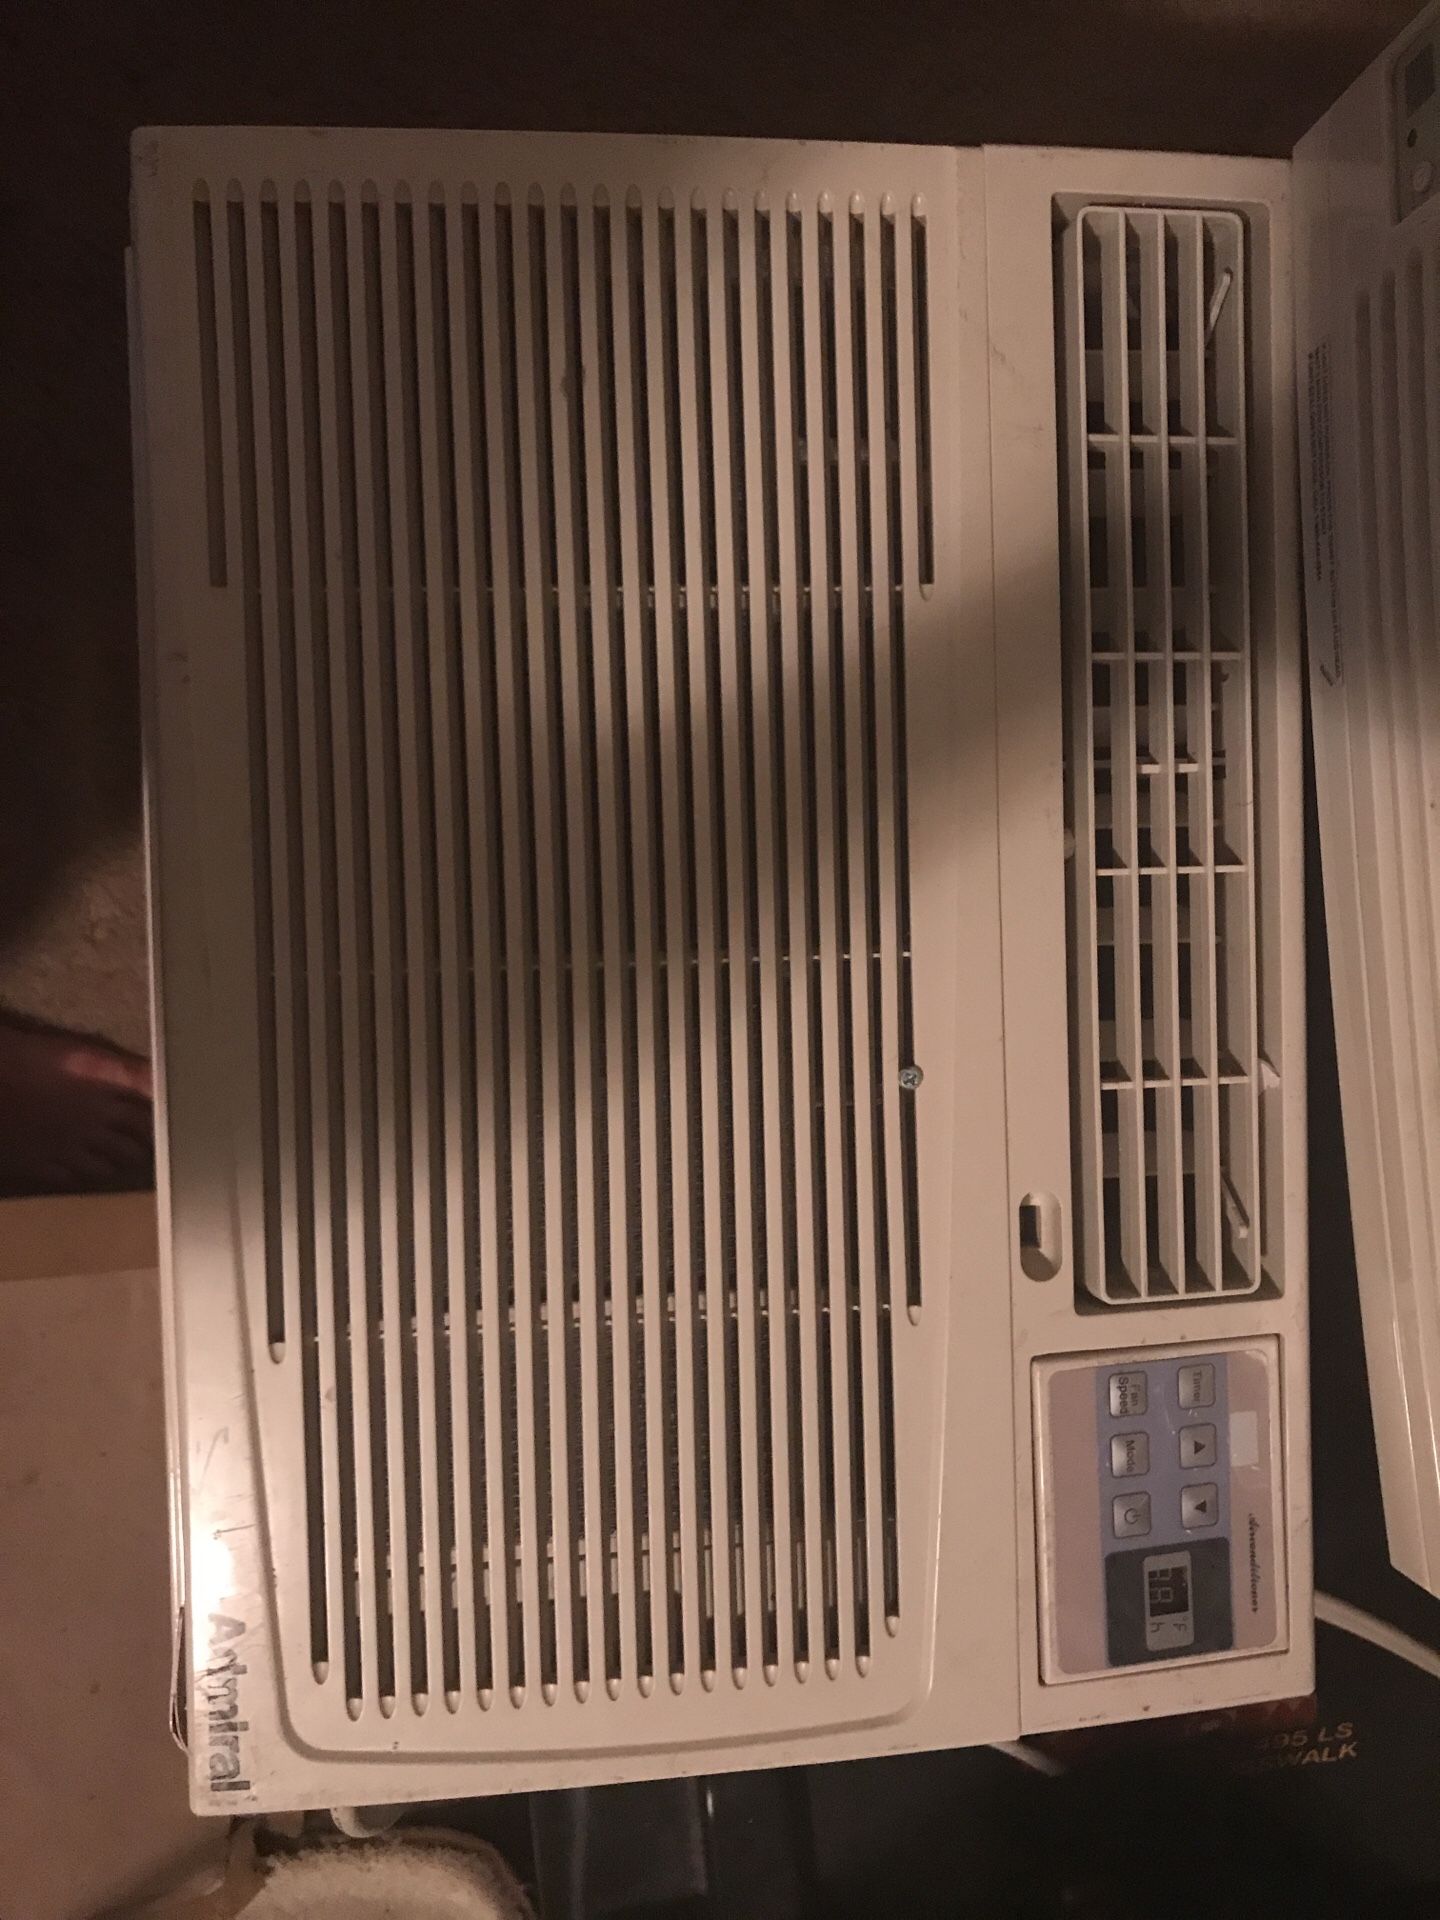 10,000 BTU air conditioner blows very cold air in great condition asking only $125